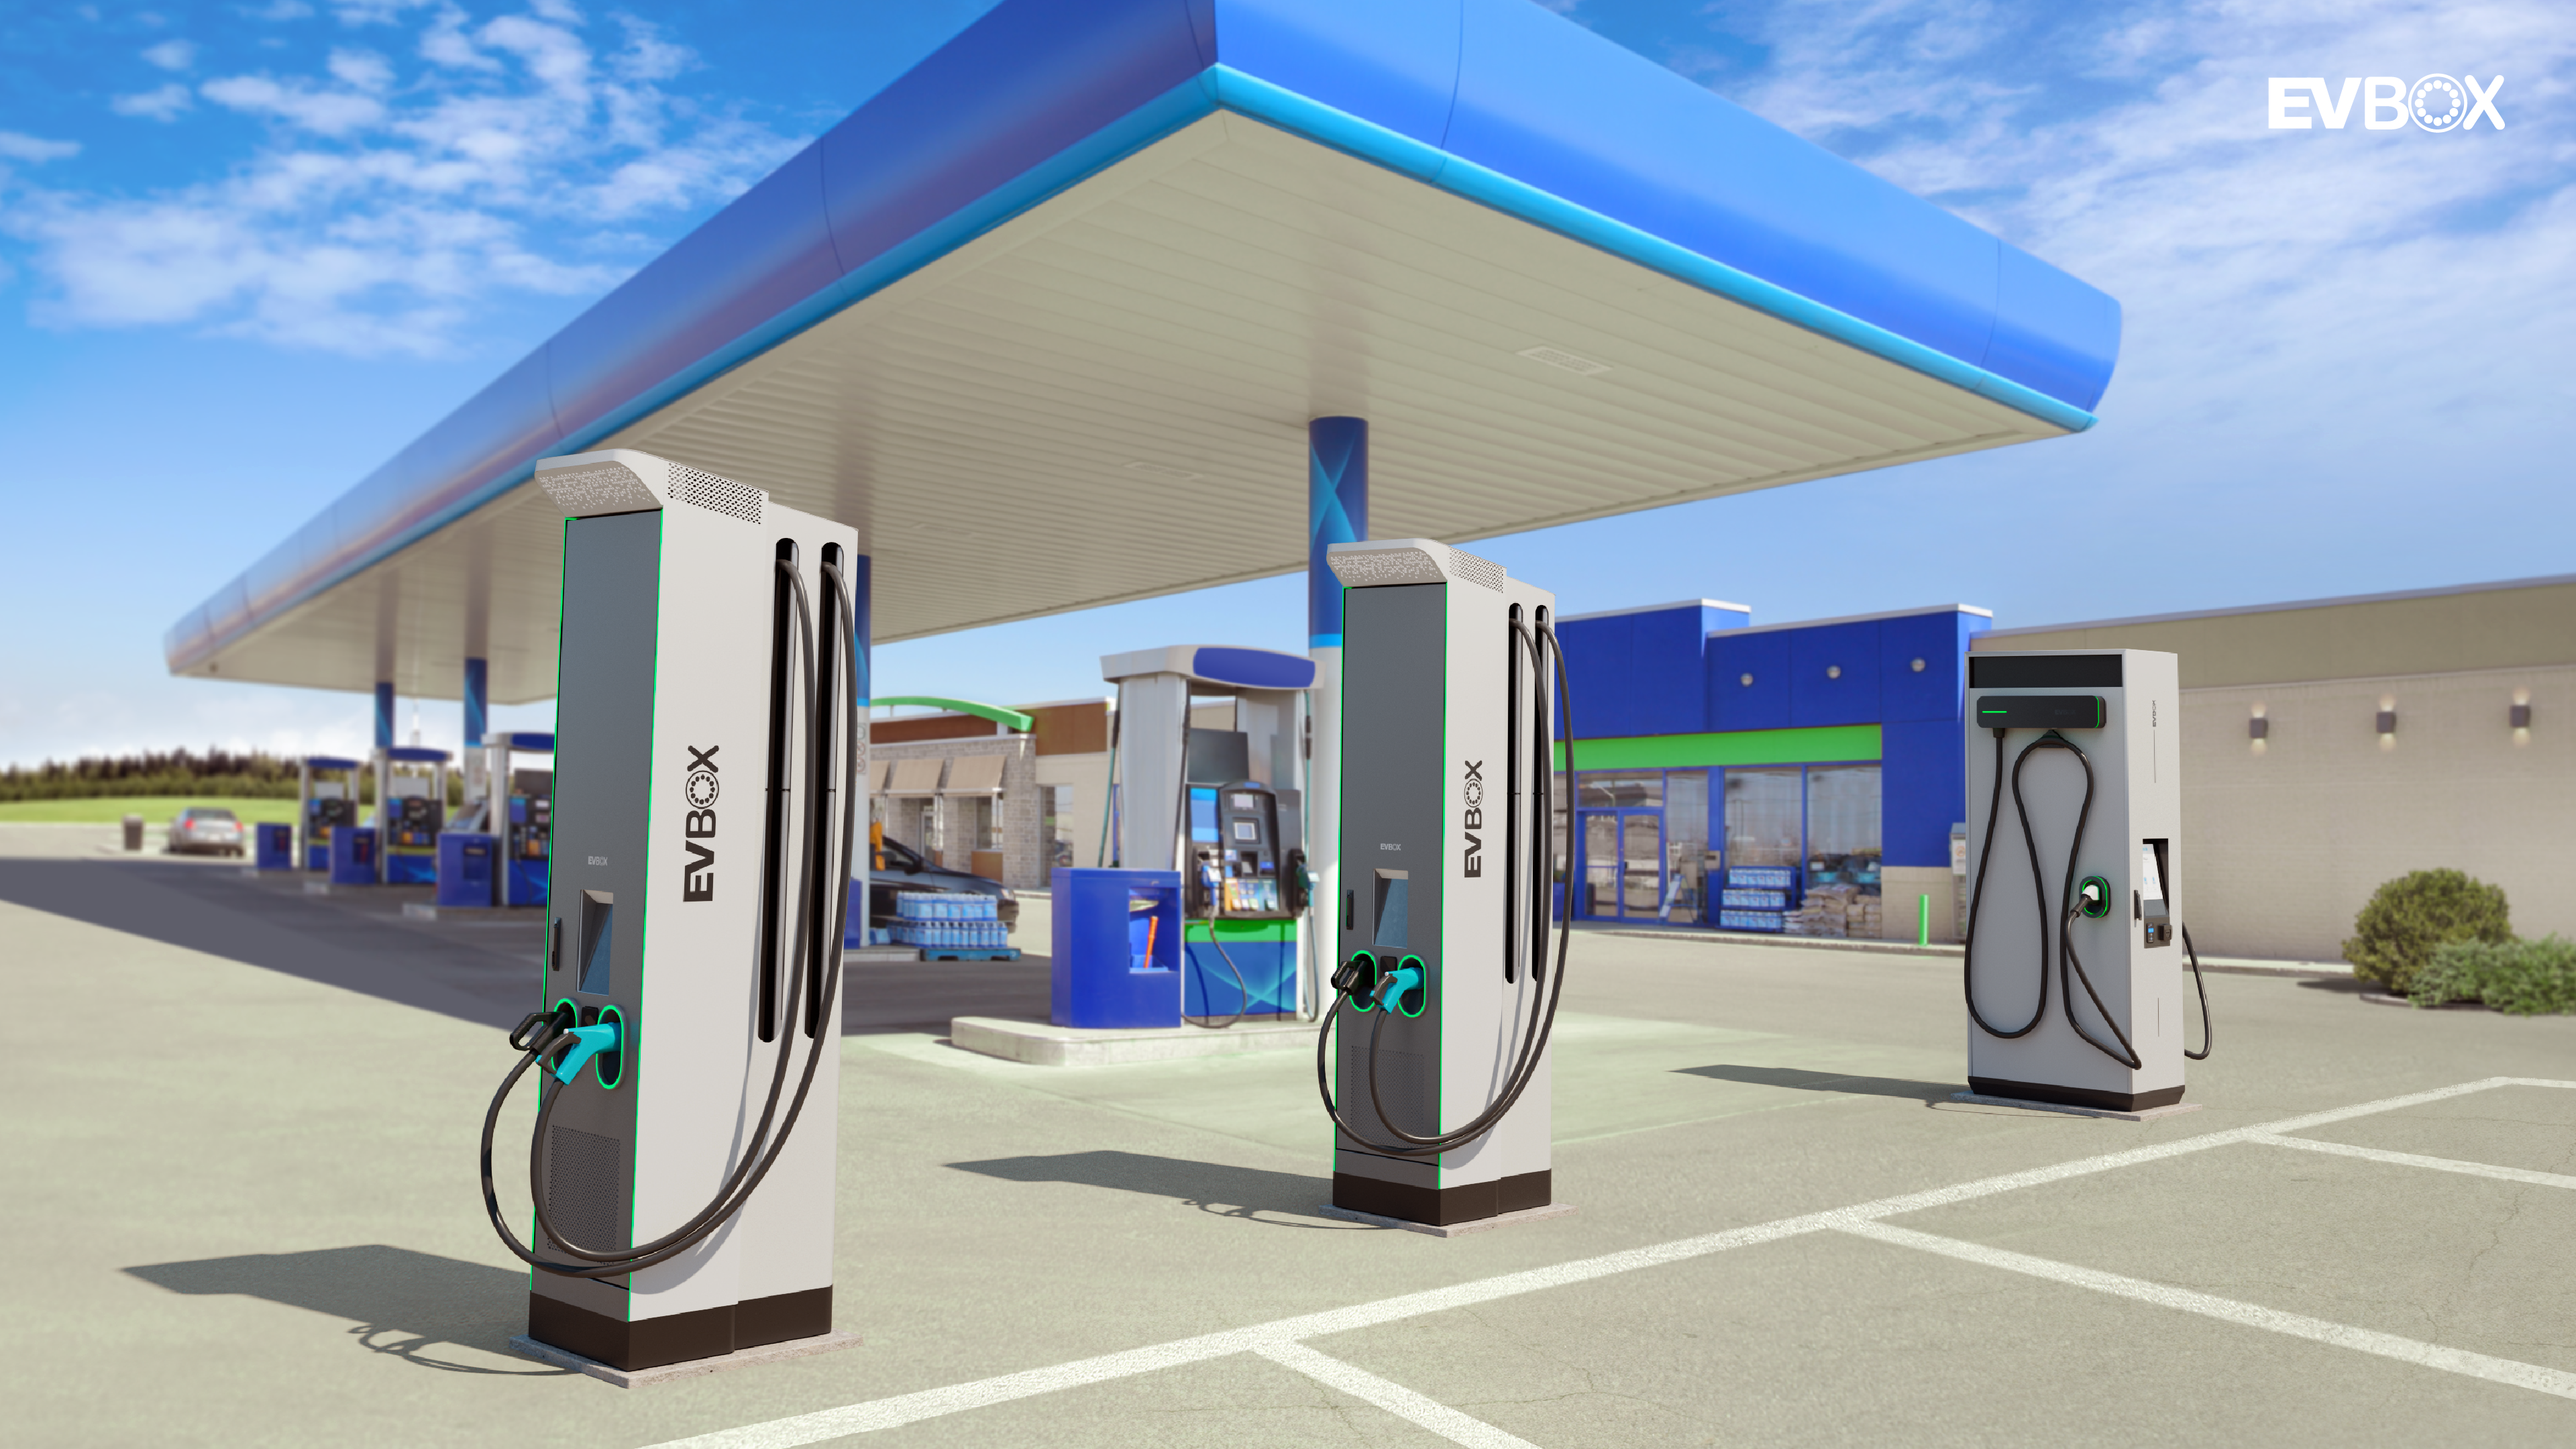 A gas station with multiple EVBox Troniq Modular DC fast charging stations in the parking lot.